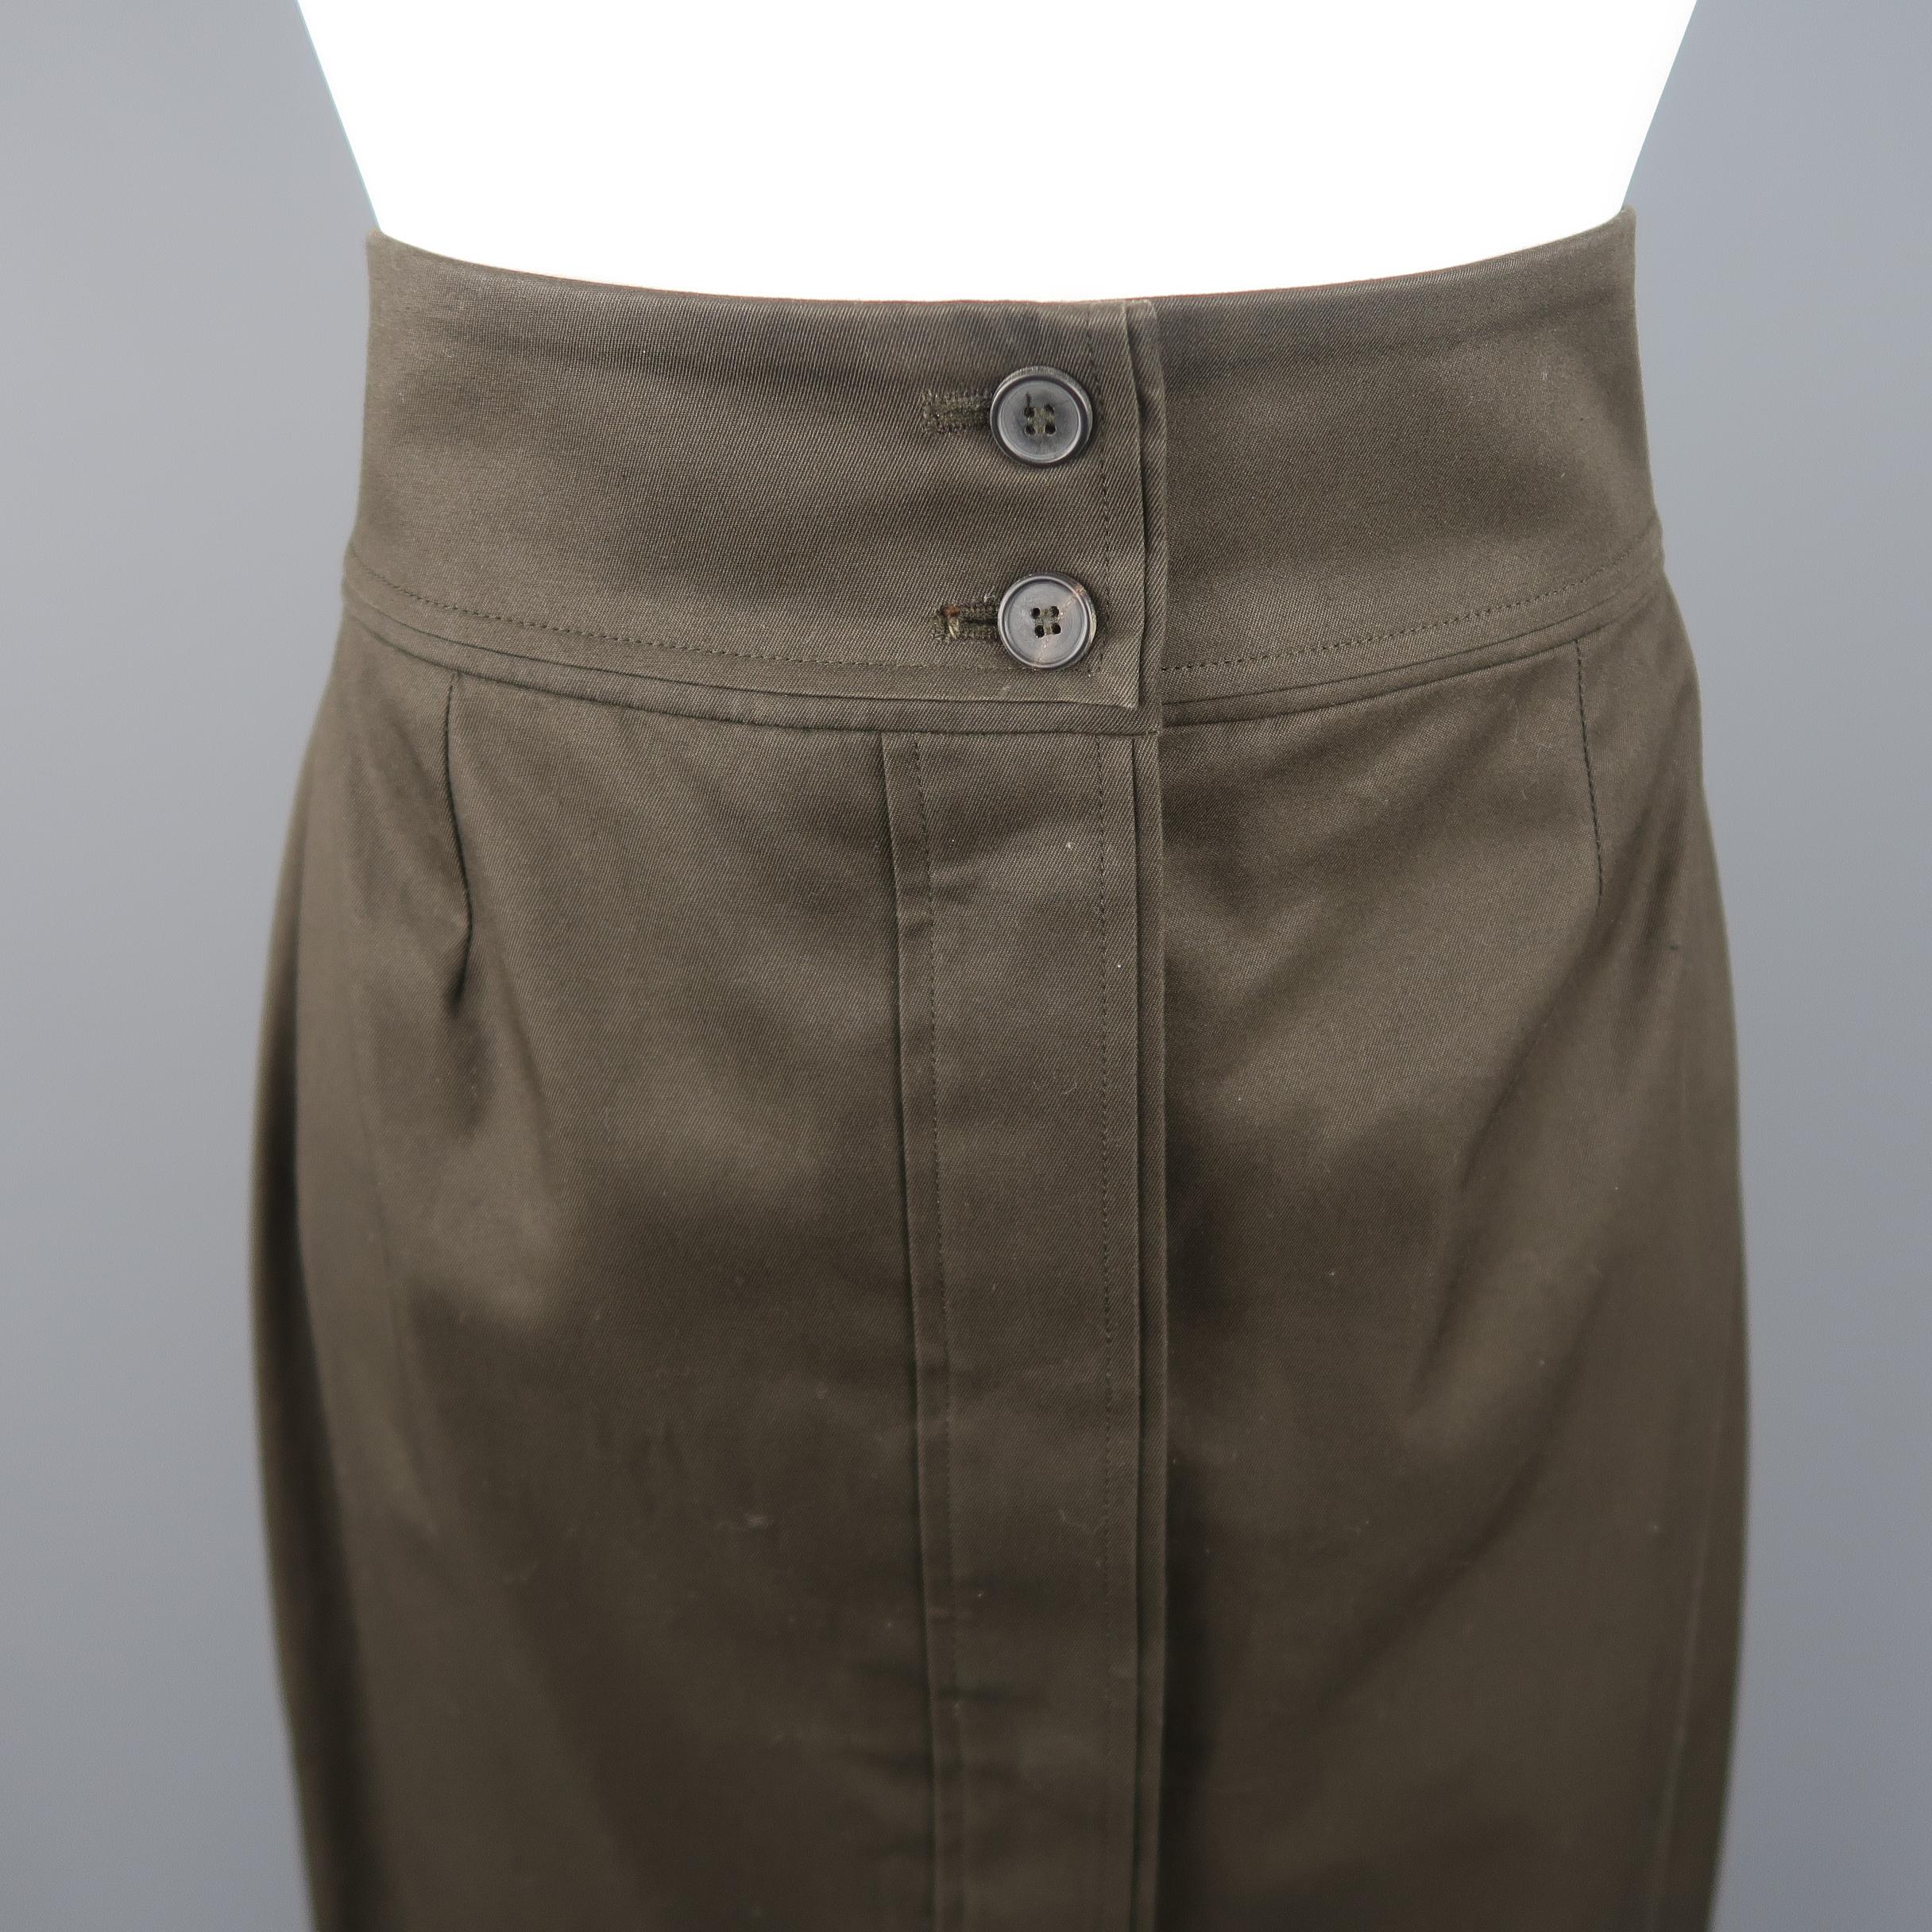 Yves Saint Laurent By Tom Ford Rive Gauche pencil skirt, come in cotton in dark green tone, with button frontal closure, pale waist and pleat details. Made in France.
 
Good Pre-Owned Condition.
Marked: FR 40
 
Measurements:
 
Waist: 29 in.
Hip: 39